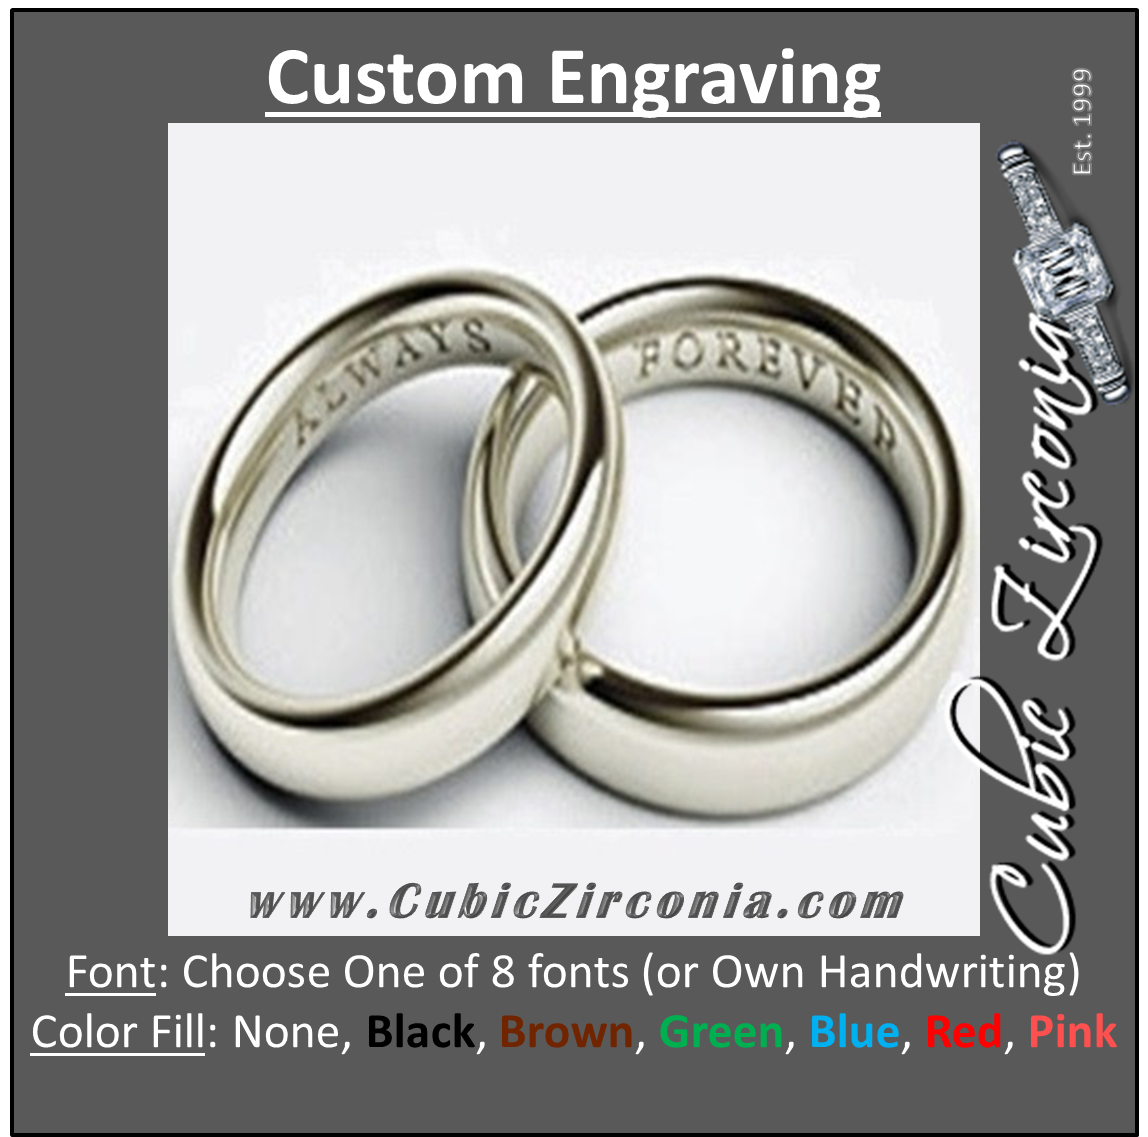 WEDDING RING ENGRAVING IDEAS – Roselle Jewelry